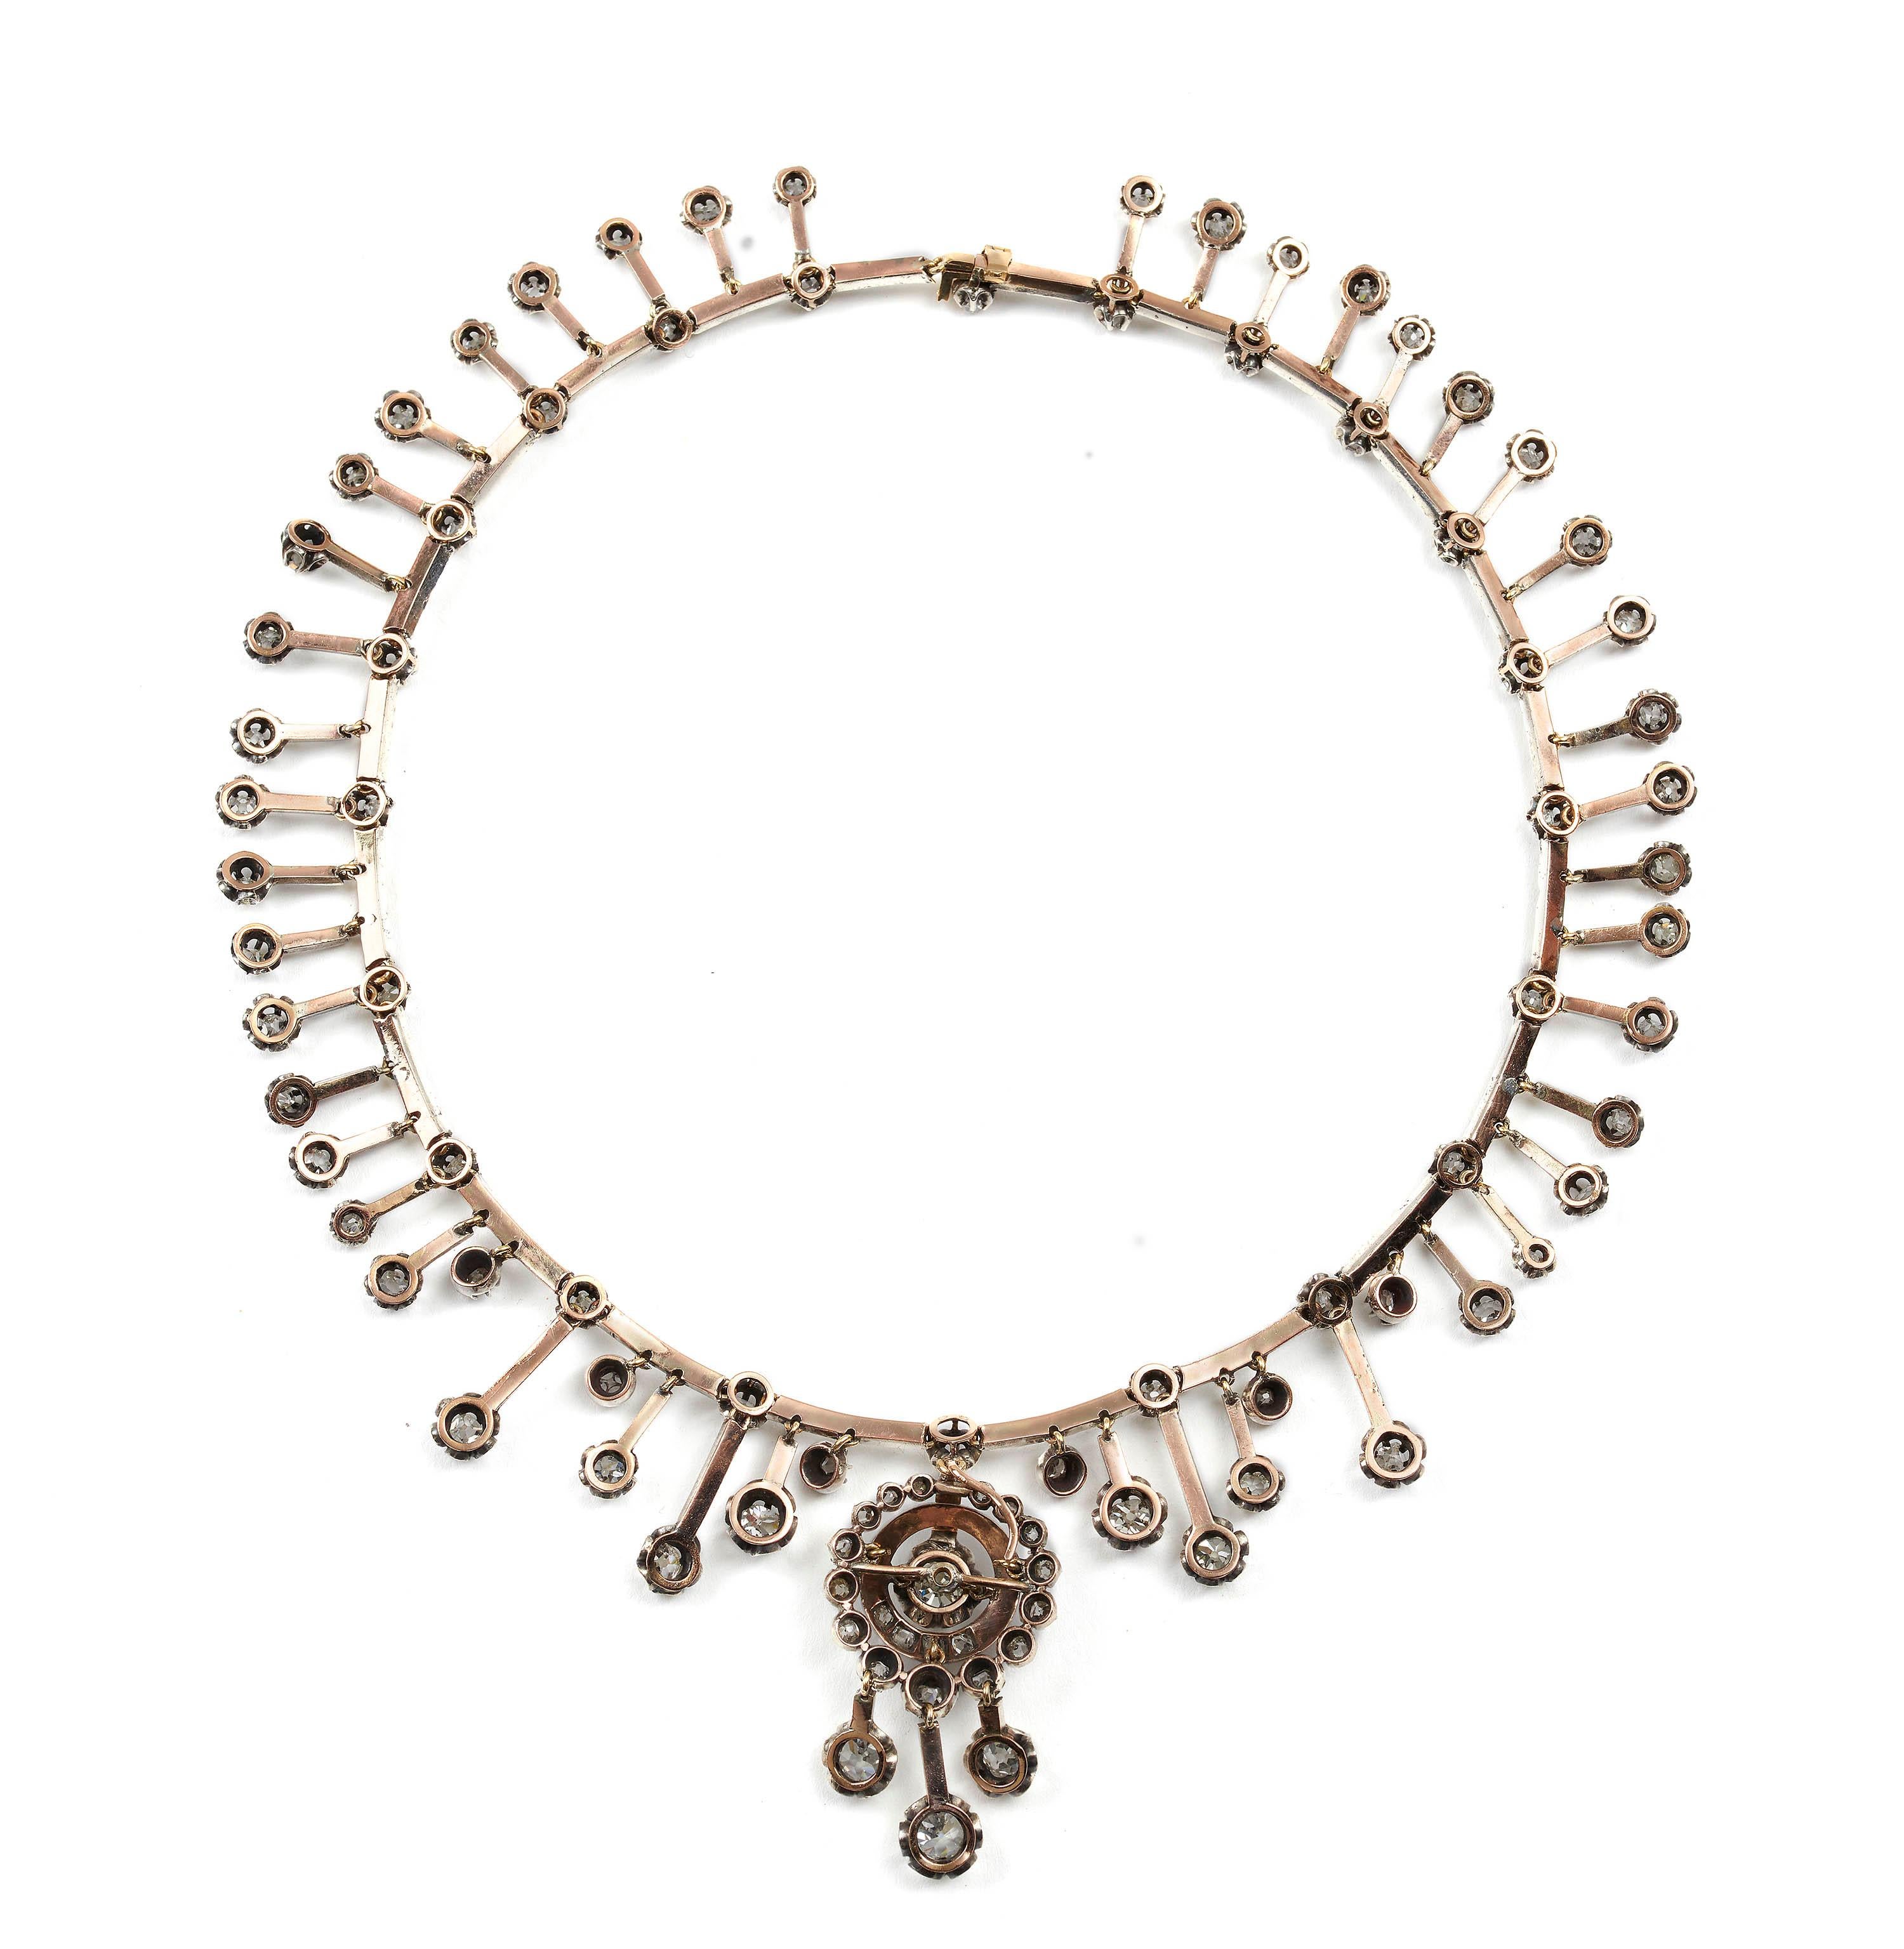 A French antique Fraumont diamond necklace and earring suite, with a drop pendant, set with an old-cut diamond, in a claw setting, surrounded by a circle of grain set diamonds and a border of graduated old-cut diamonds, with three suspended old-cut